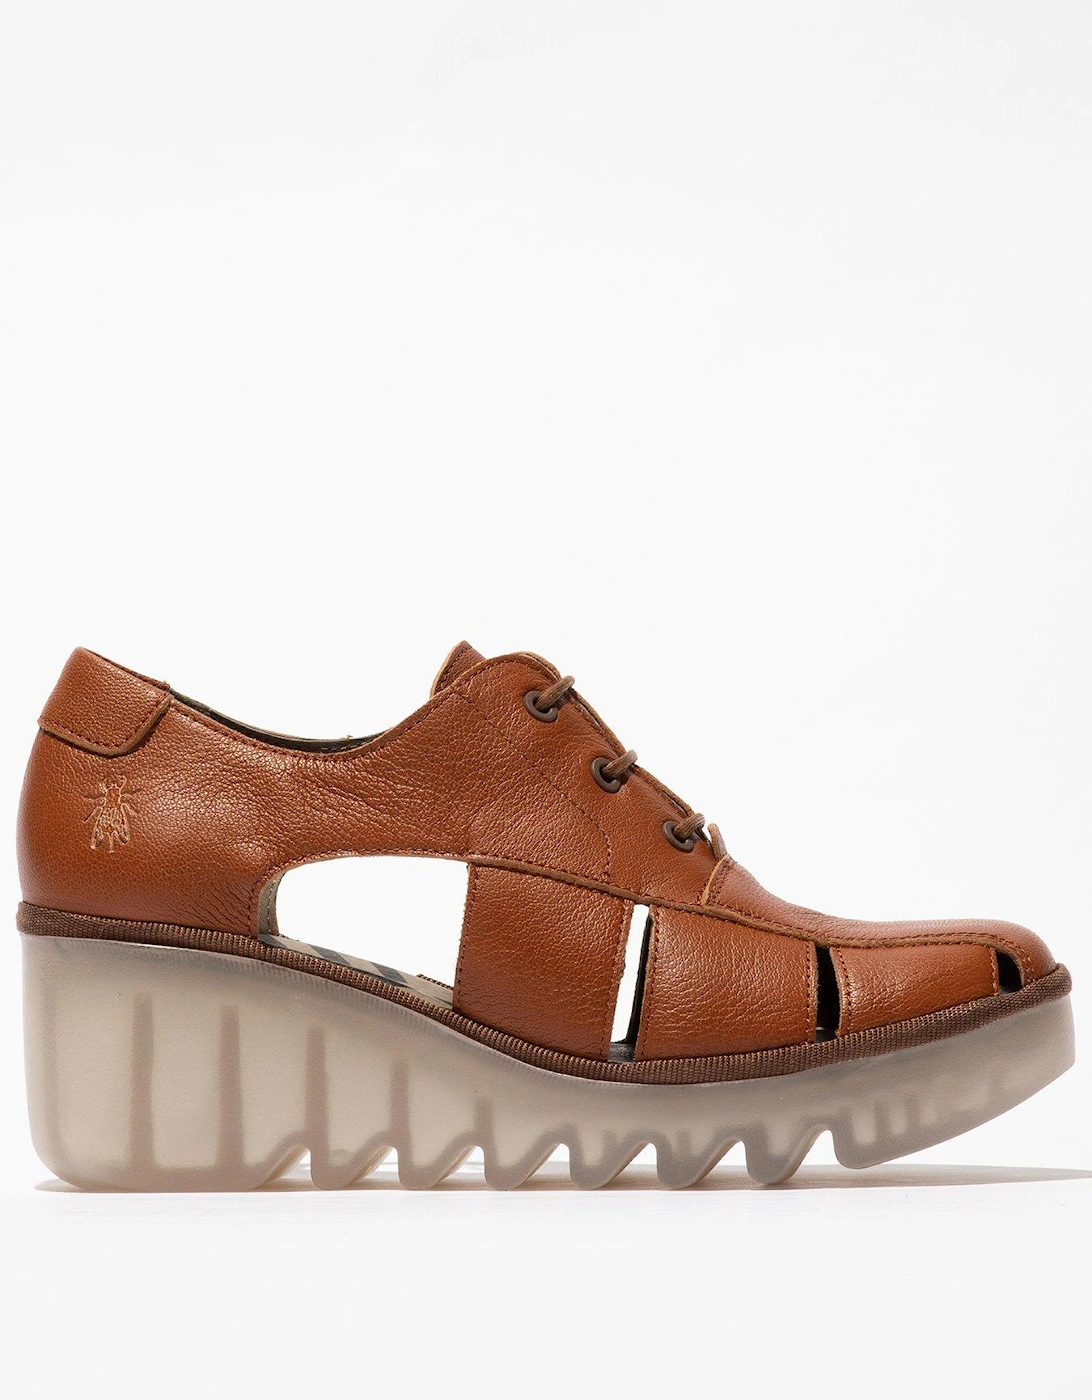 Bogi Lace Up Cut Out Wedged Shoes - Tan, 2 of 1